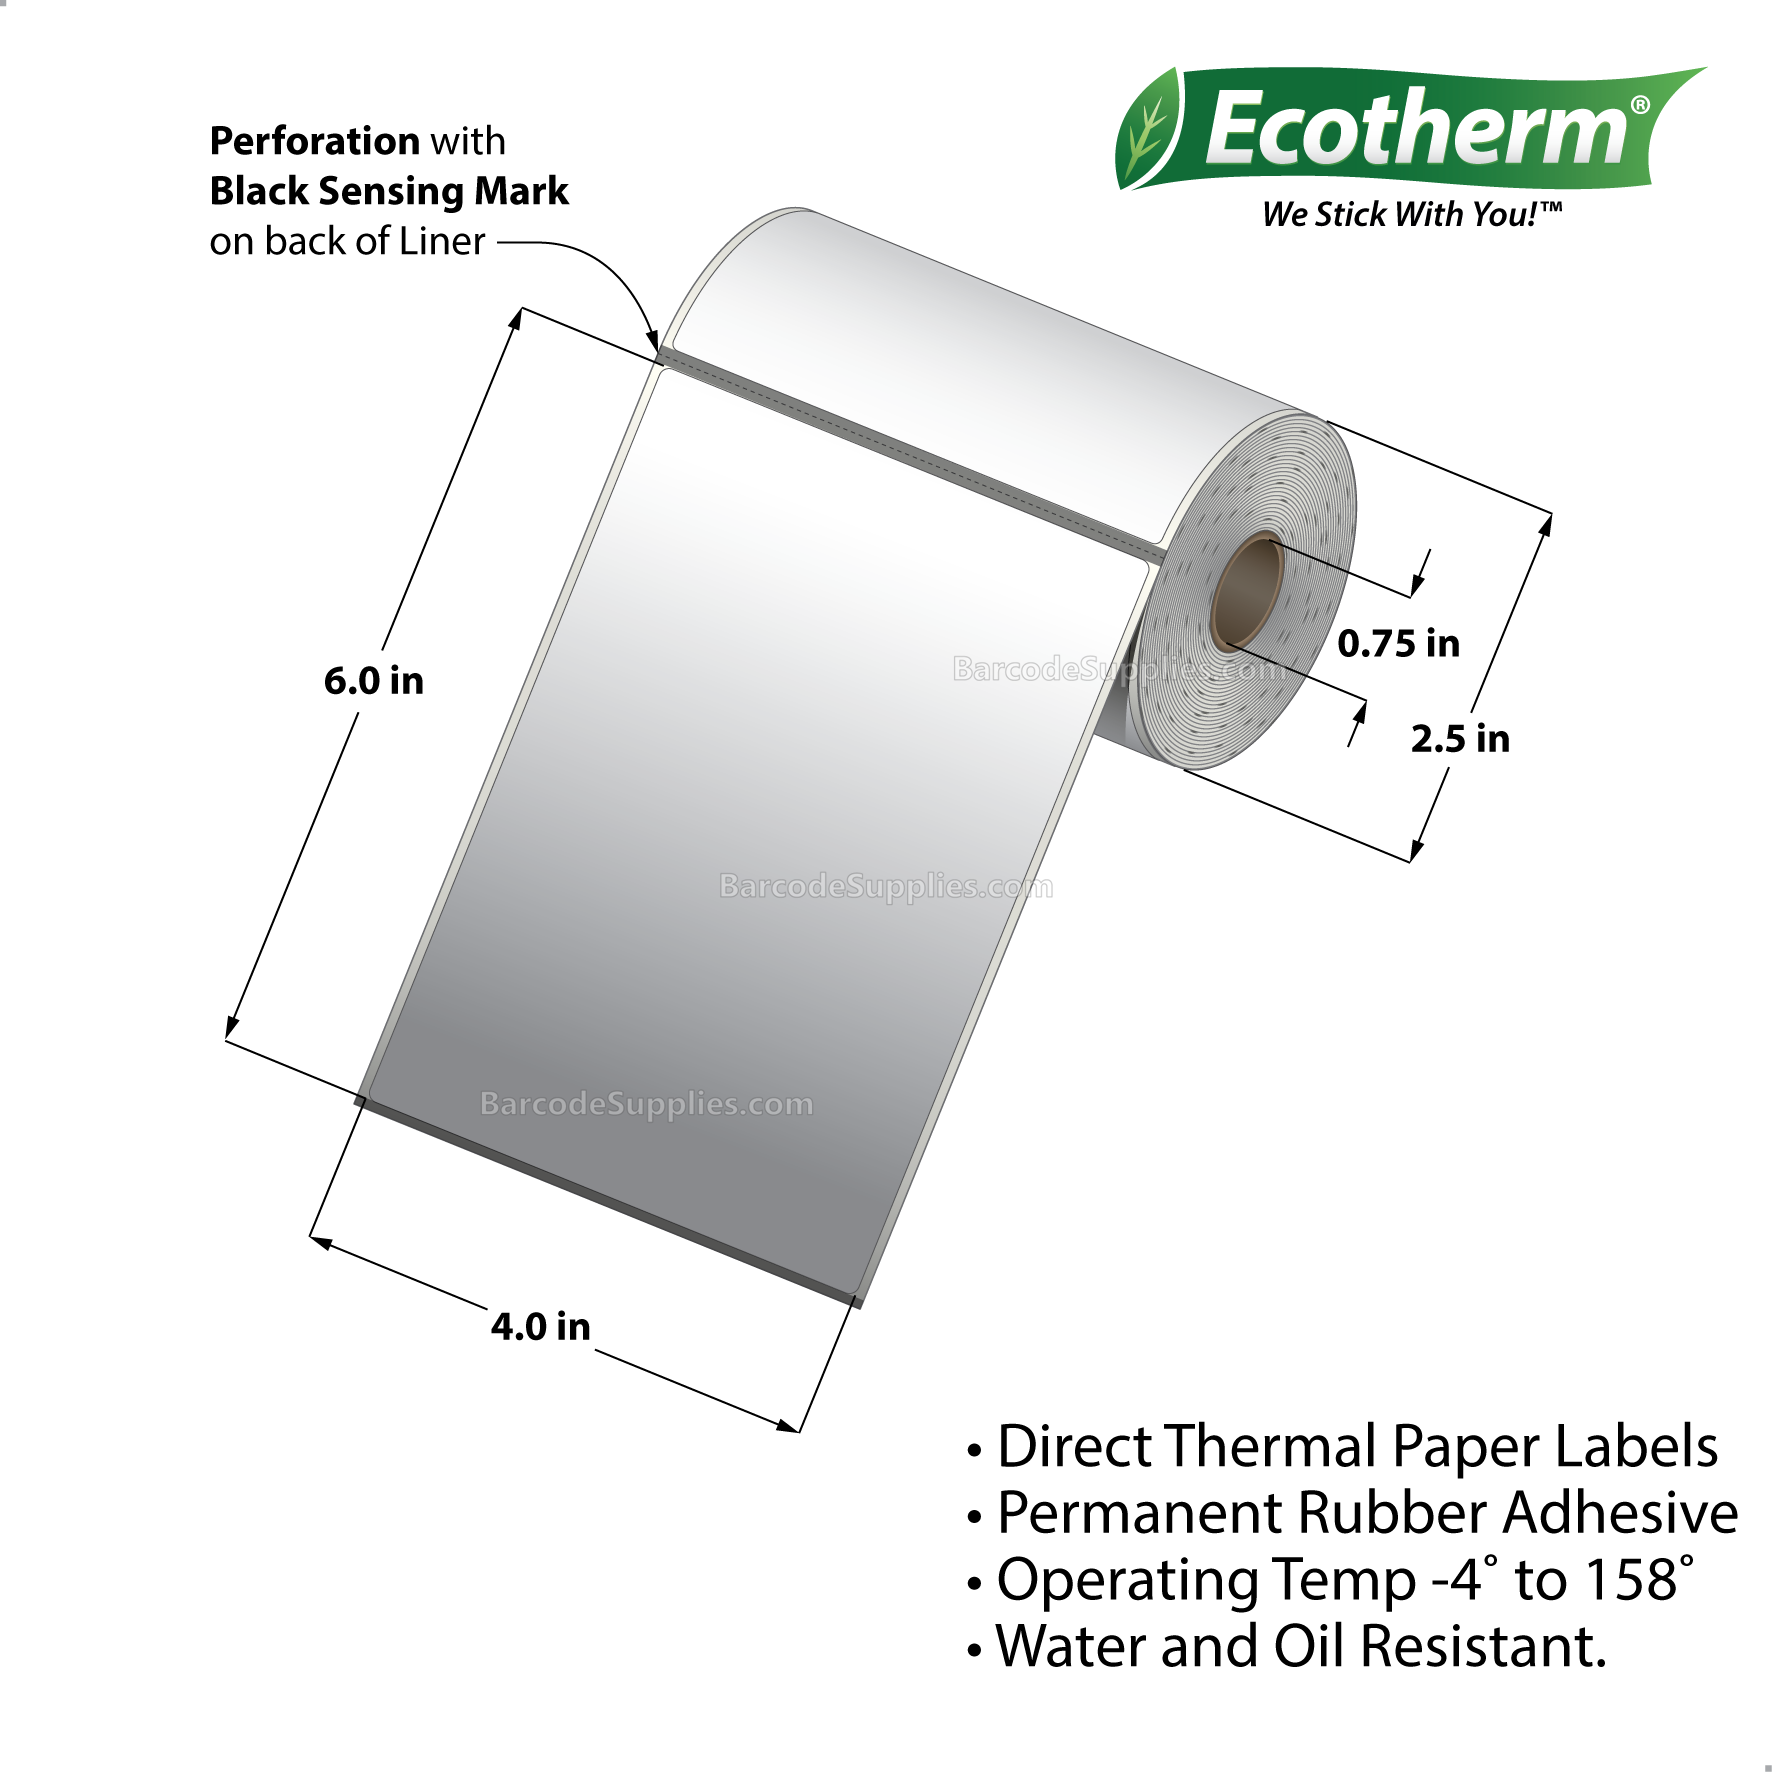 Products 4 x 6 Direct Thermal White Labels With Rubber Adhesive - Perforated - 105 Labels Per Roll - Carton Of 36 Rolls - 3780 Labels Total - MPN: ECOTHERM13108-36